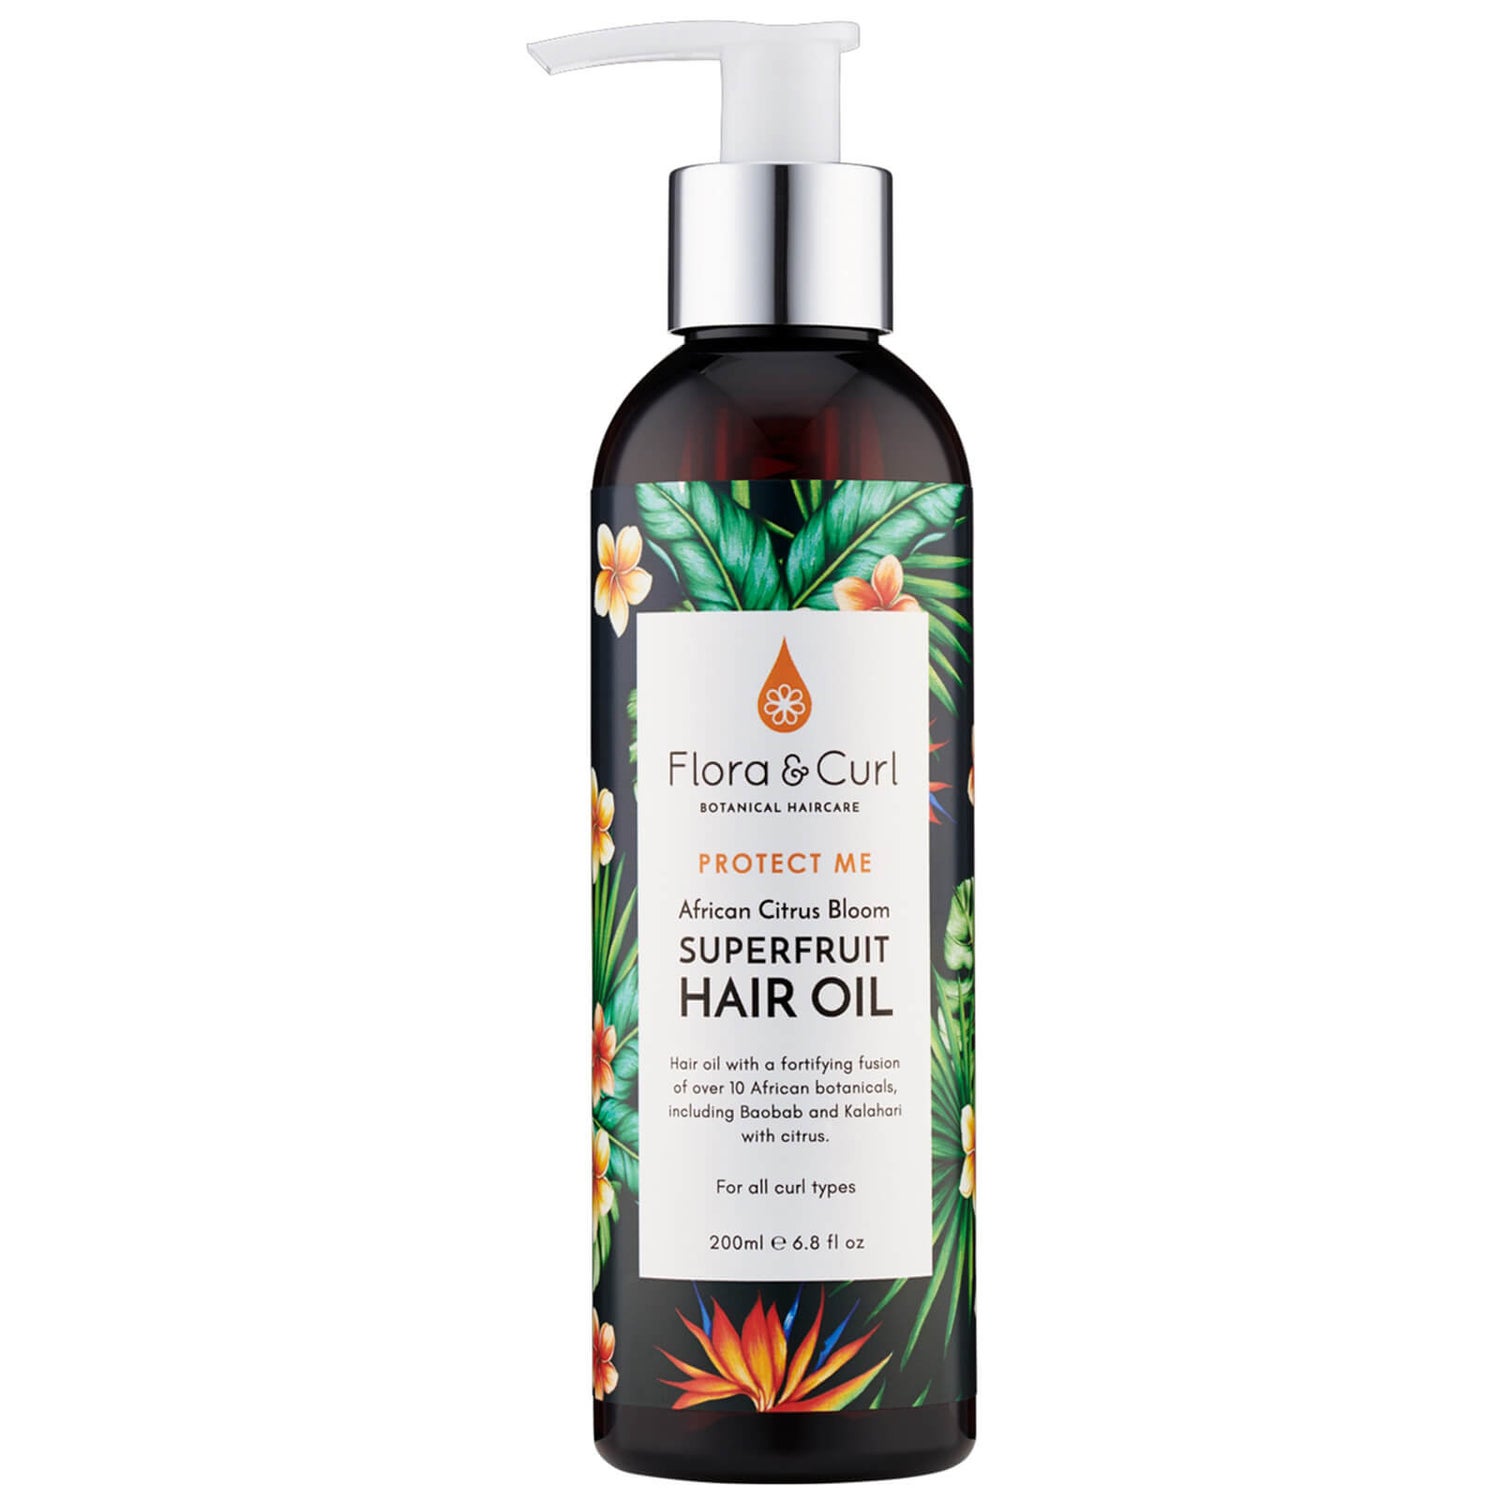 Share more than 84 hair oil for curly hair latest - in.eteachers